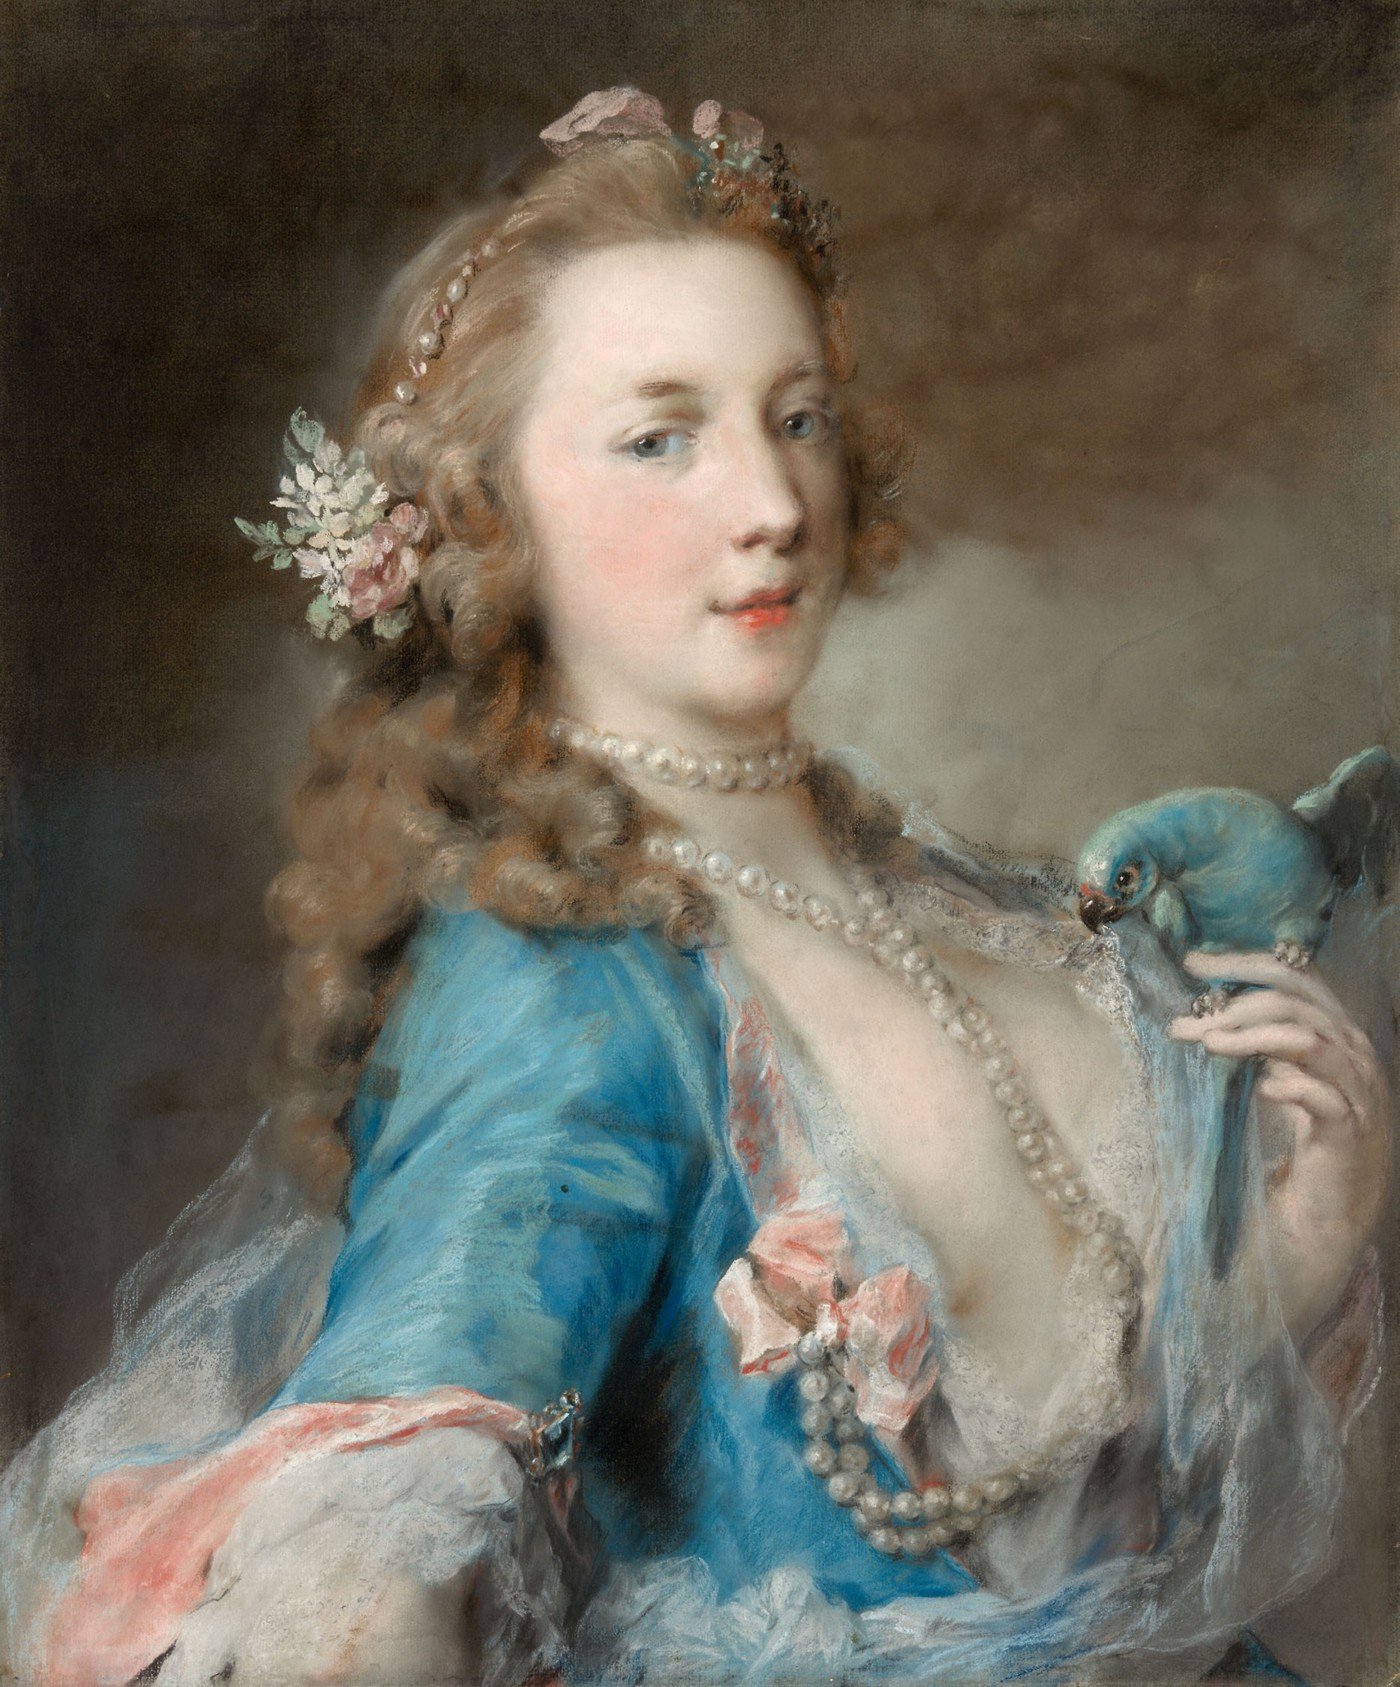 Rosalba Carriera, A Young Lady with a Parrot (circa 1730). Collection of the Art Institute of Chicago.